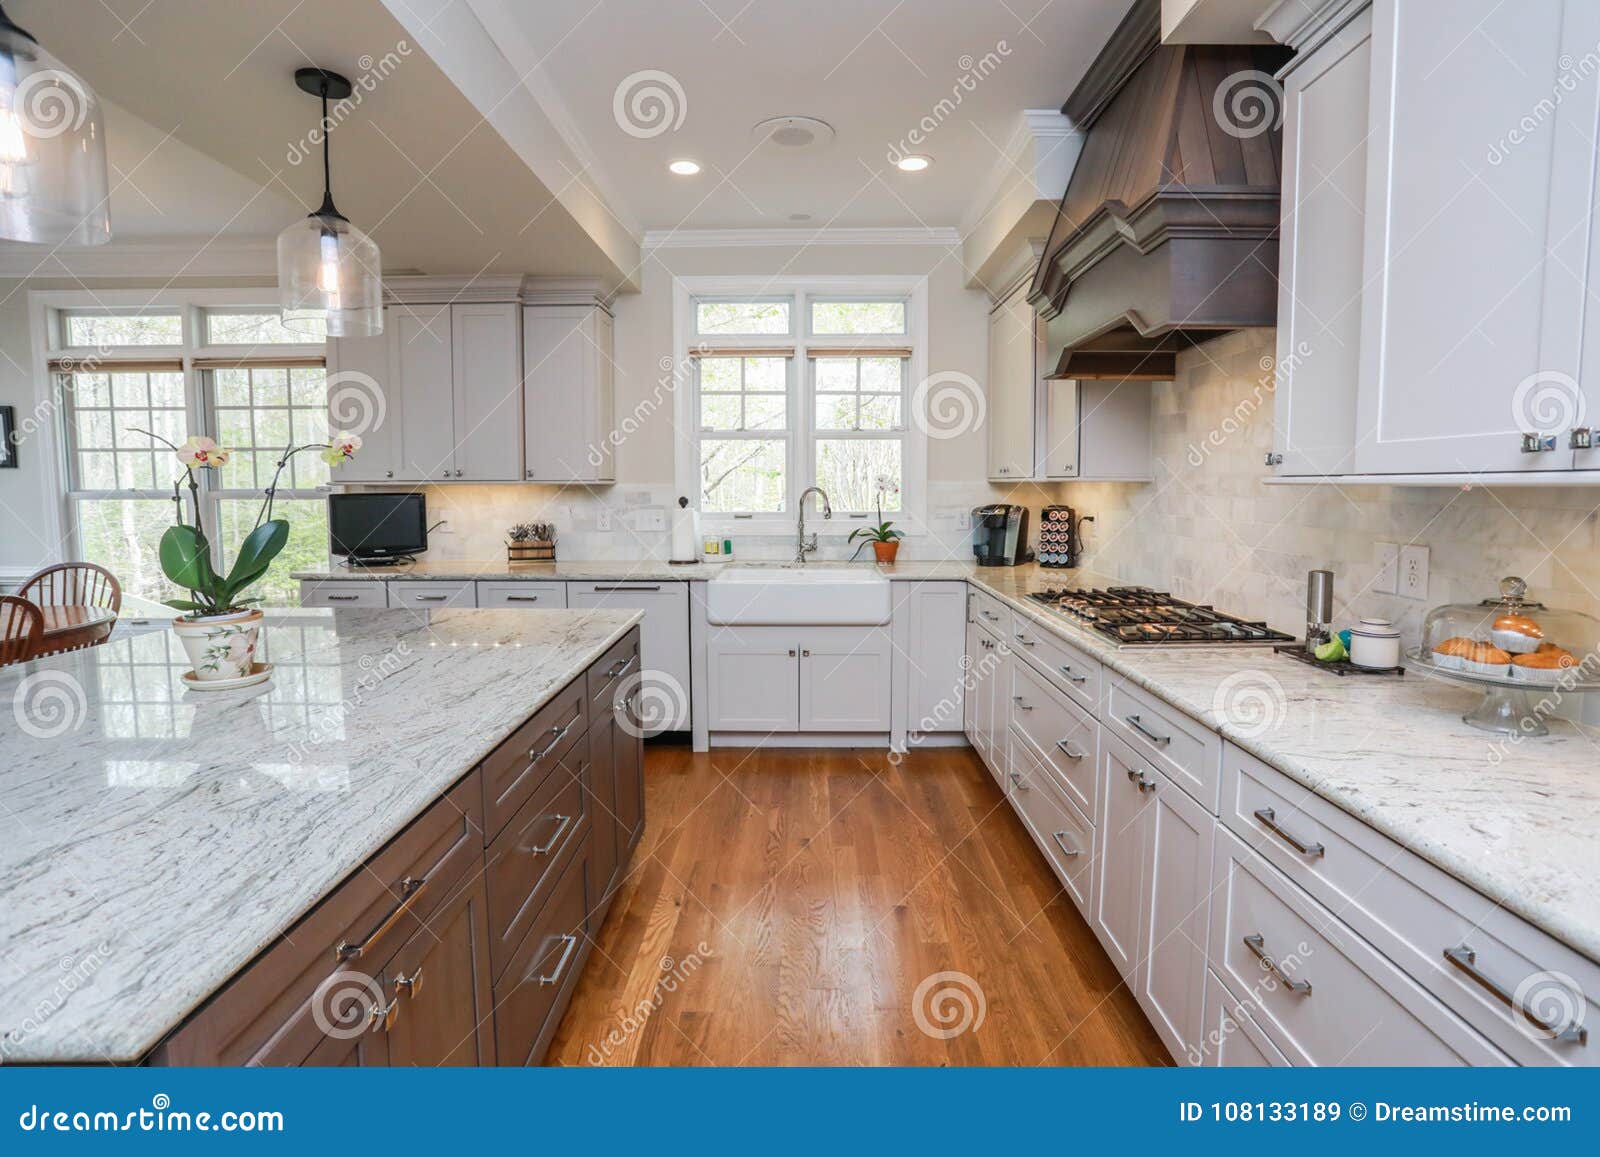 High End Kitchen Stock Image Image Of Kitchen Wood 108133189